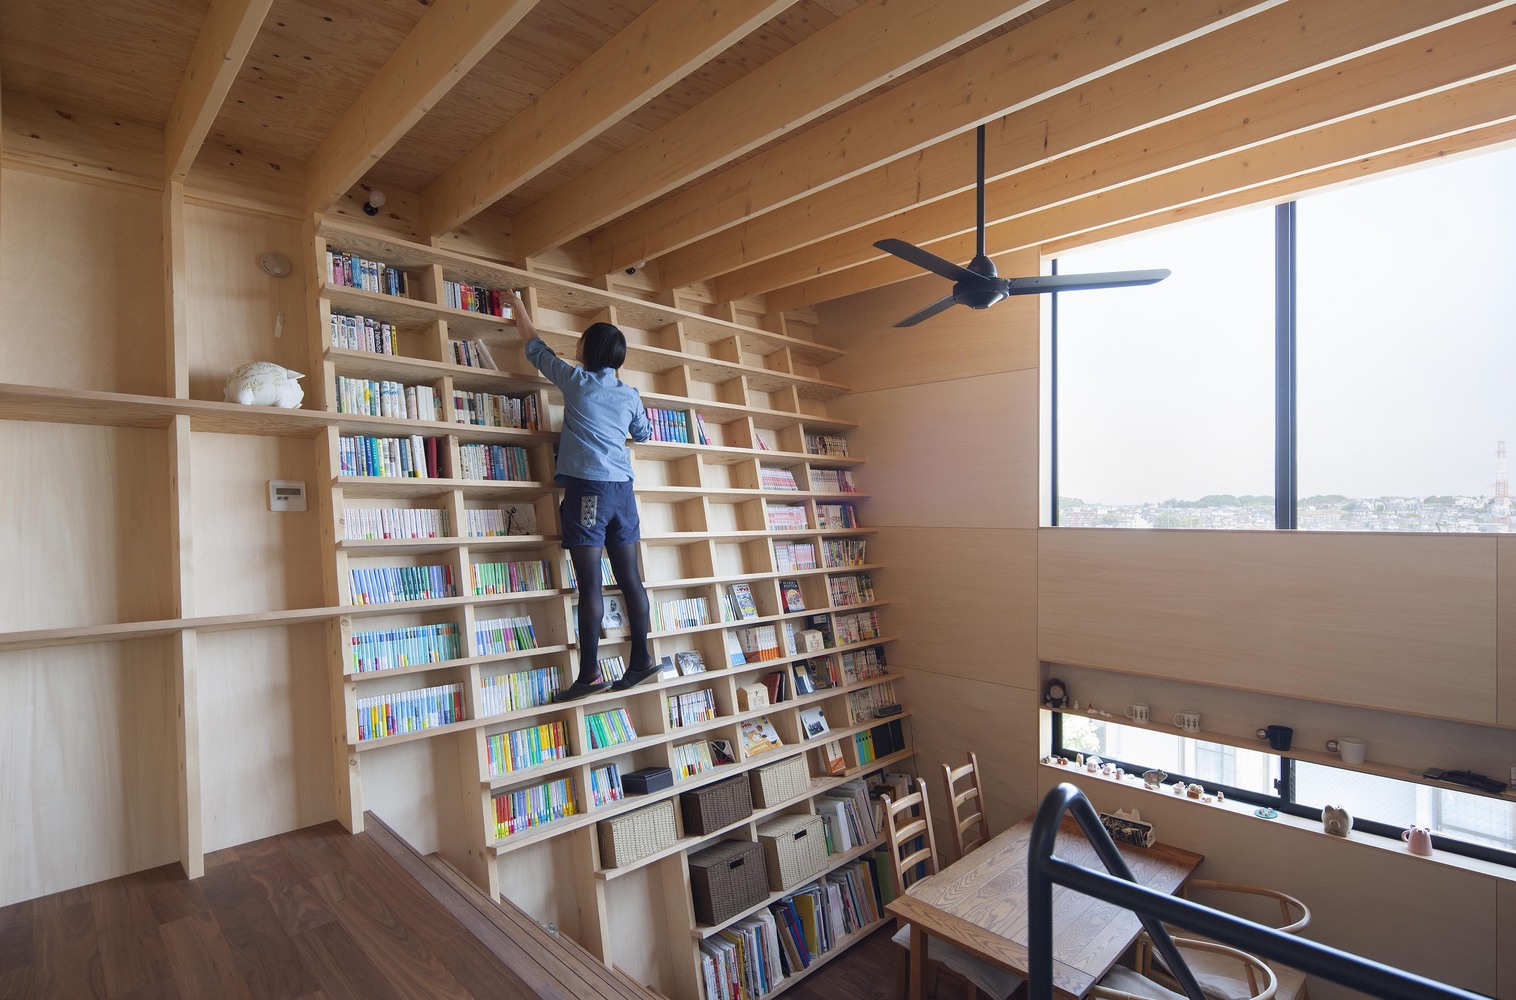 This Japanese Book Shelf House Features An Earthquake Proof